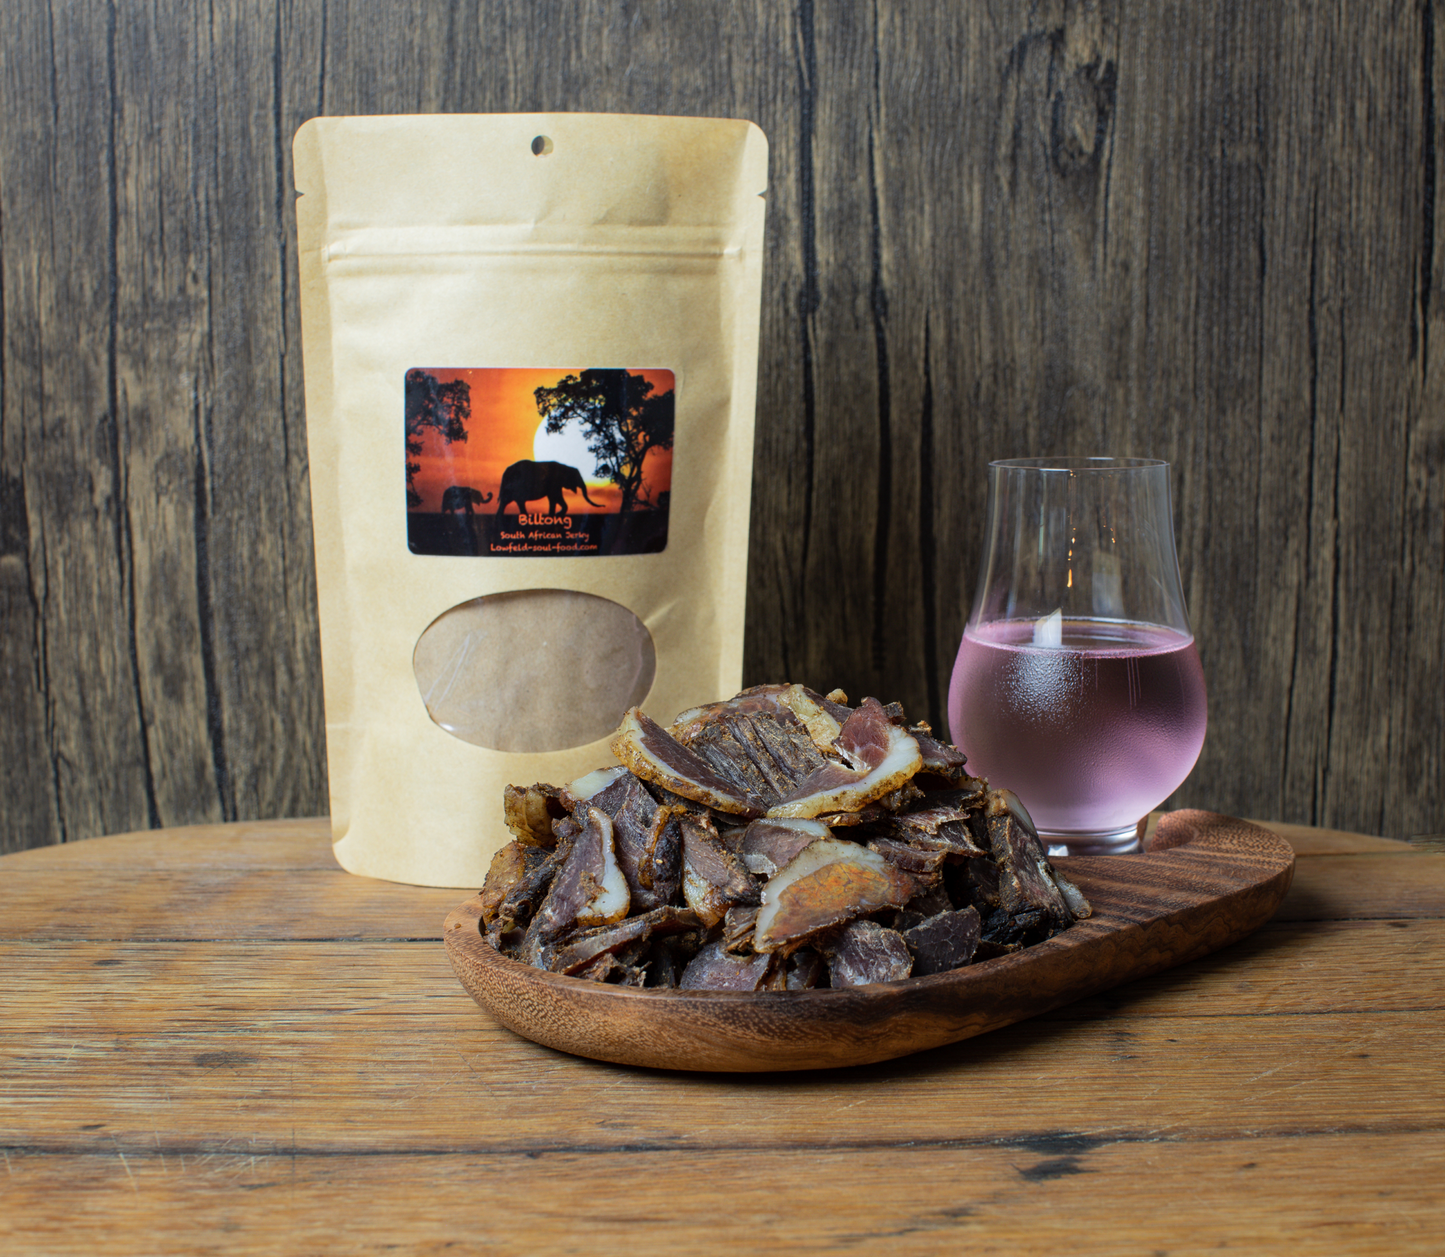 Beef Biltong Slab or Sliced (South African Style Jerky)